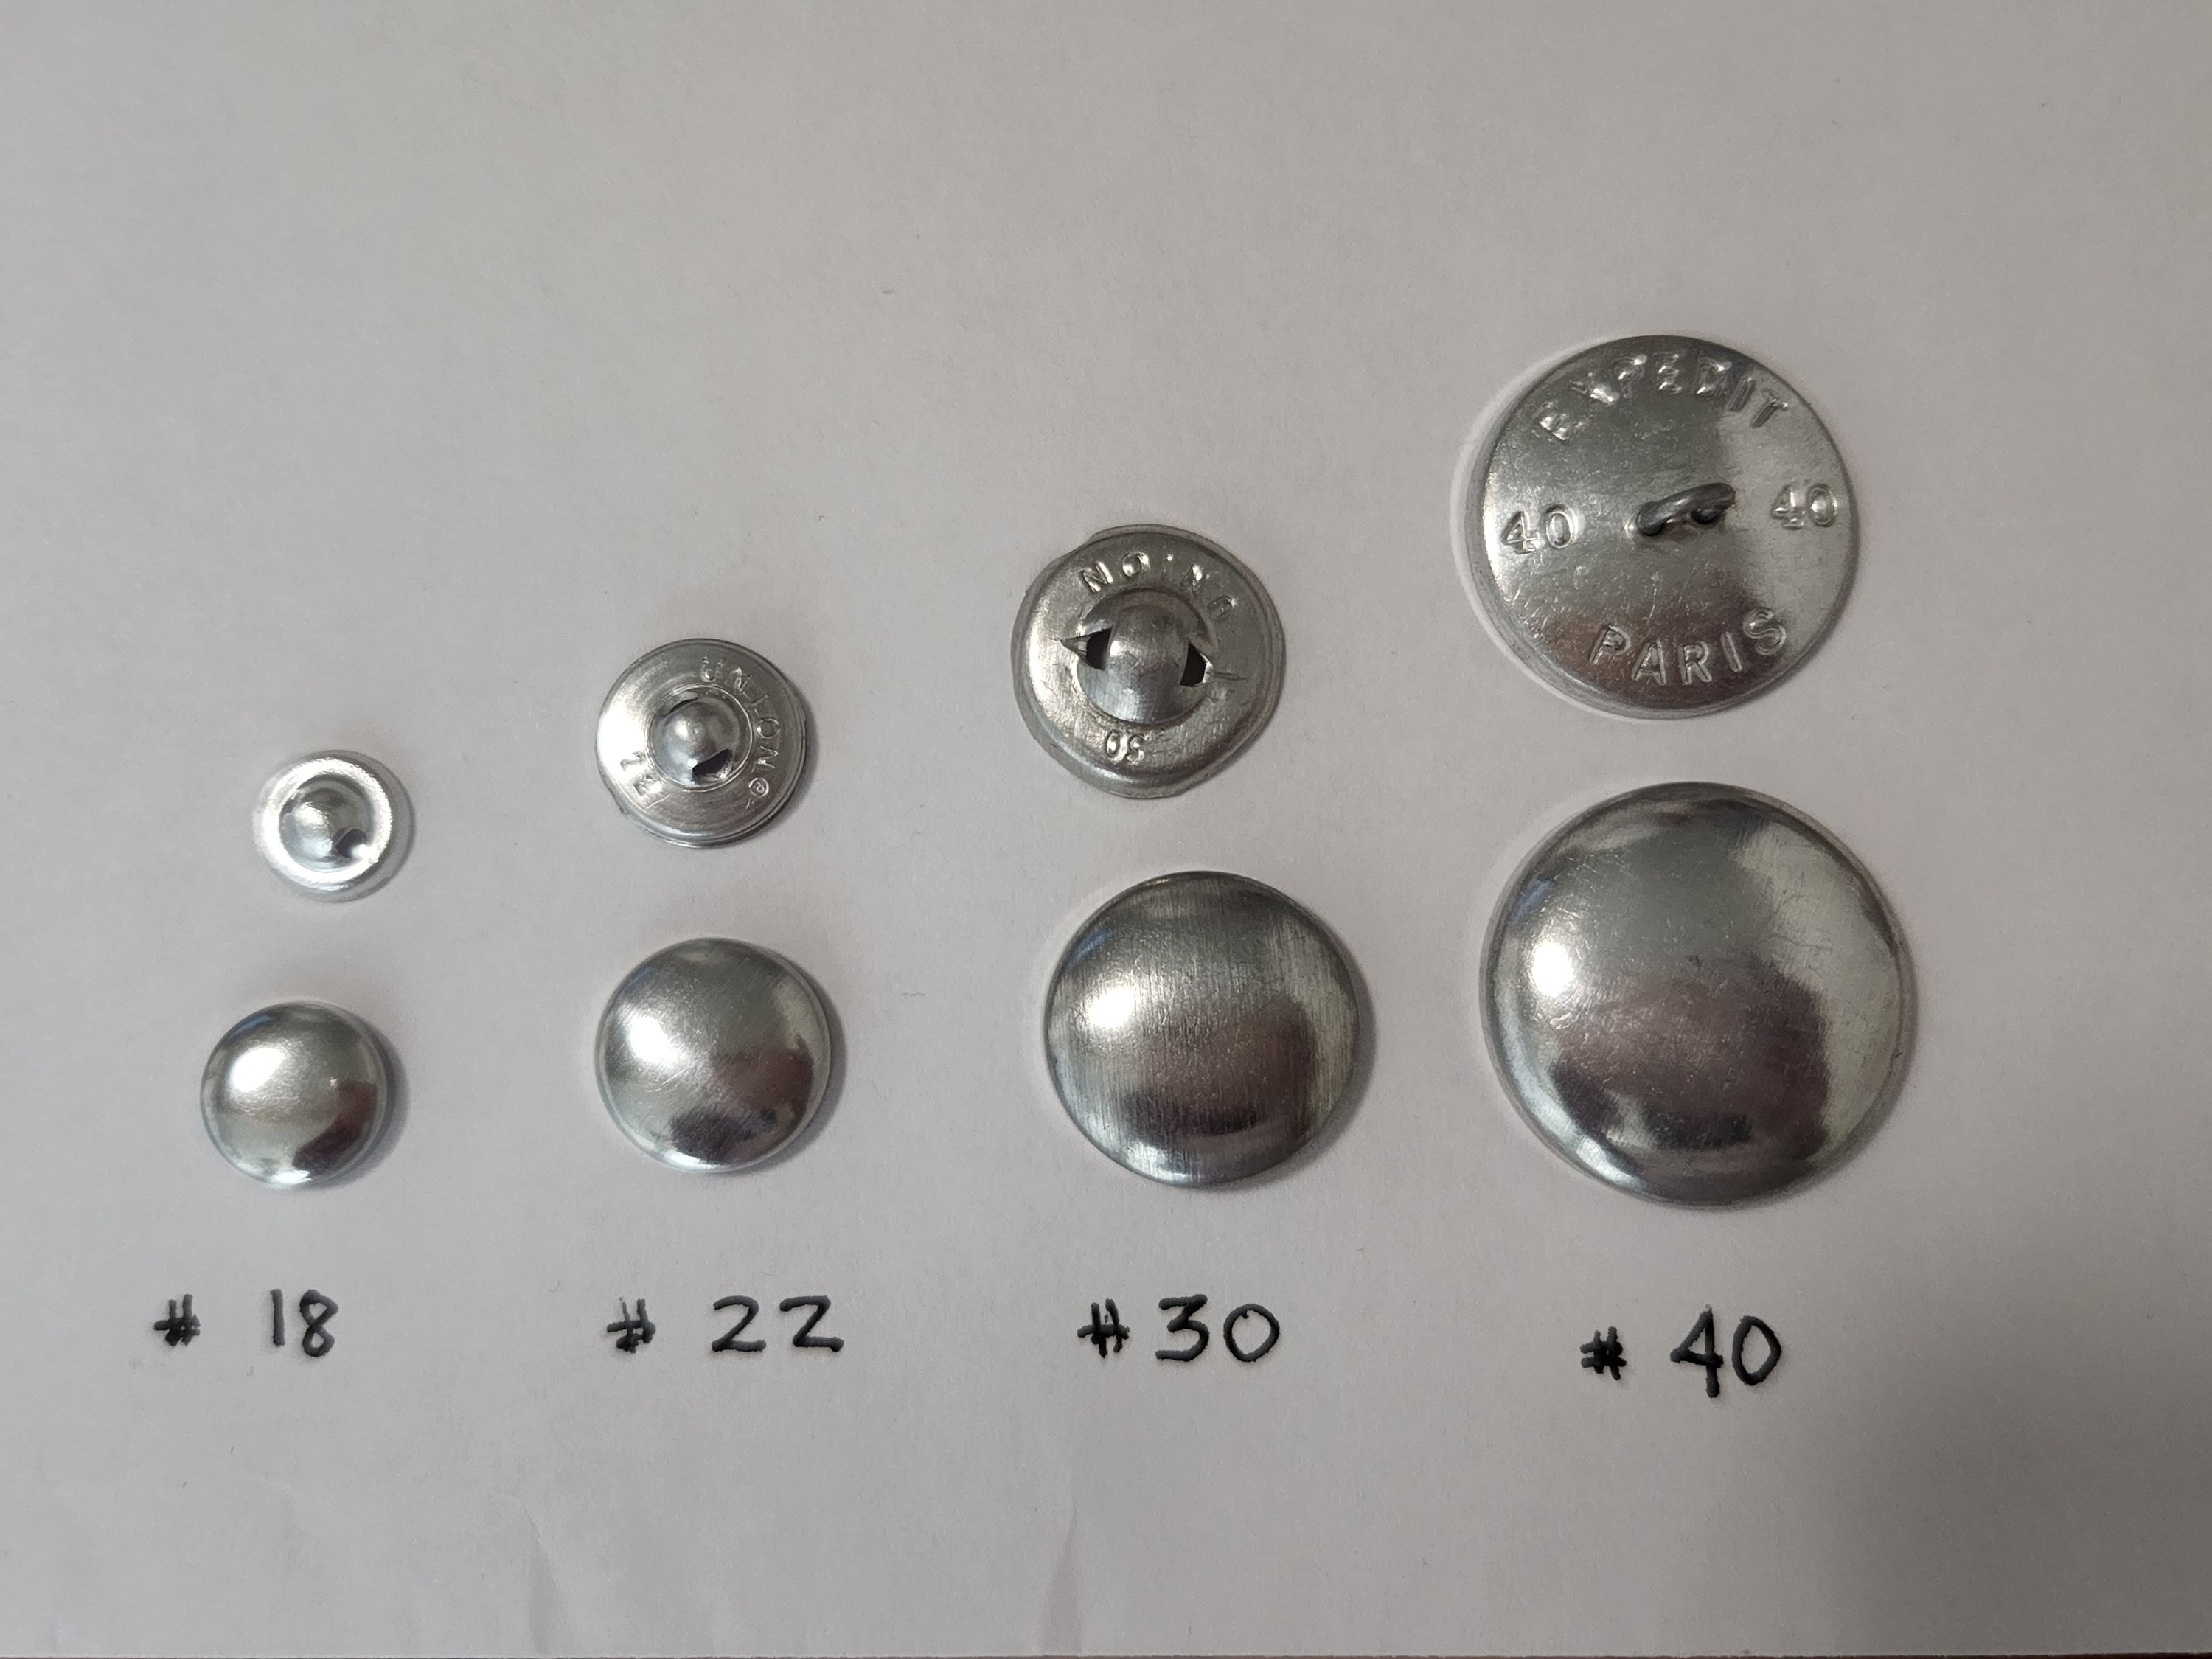 150 Pcs Round Button Parts Blank Button Making Supplies Metal Button Badge  Sets for Button Maker Machine, Include Metal Shells Metal Back Cover Clear  Film Components (Silver, 37 mm/ 1.46 Inch) - Yahoo Shopping